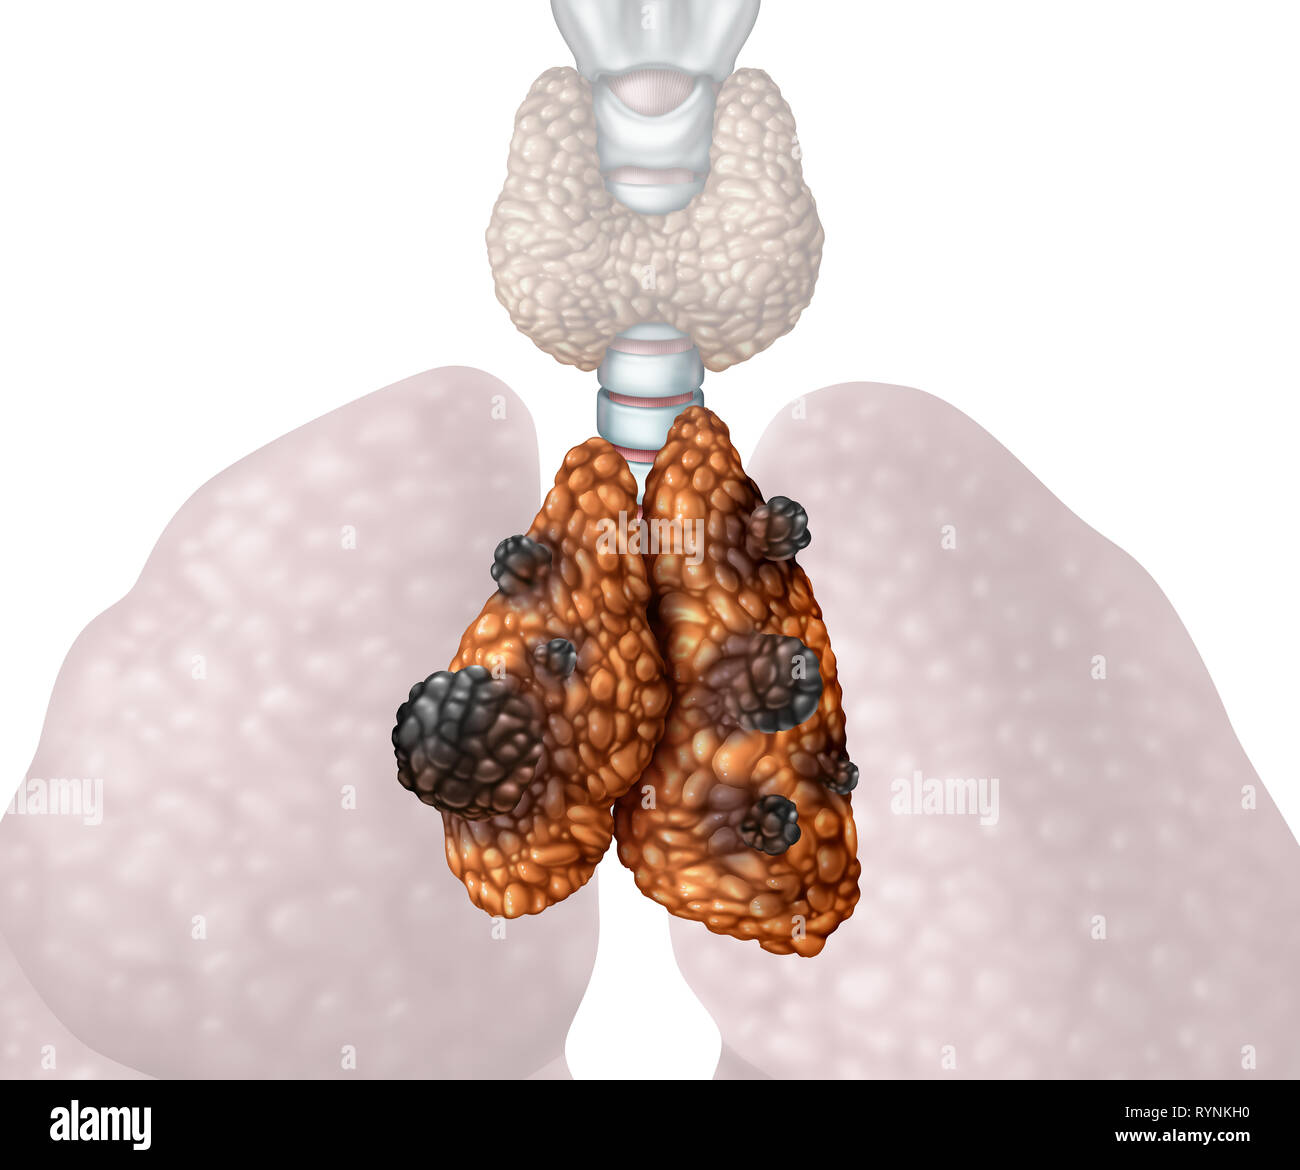 Thymus cancer or thymoma and thymic carcinoma disease as a gland anatomy illness with growing malignant mutating cell growth as an icon isolated. Stock Photo